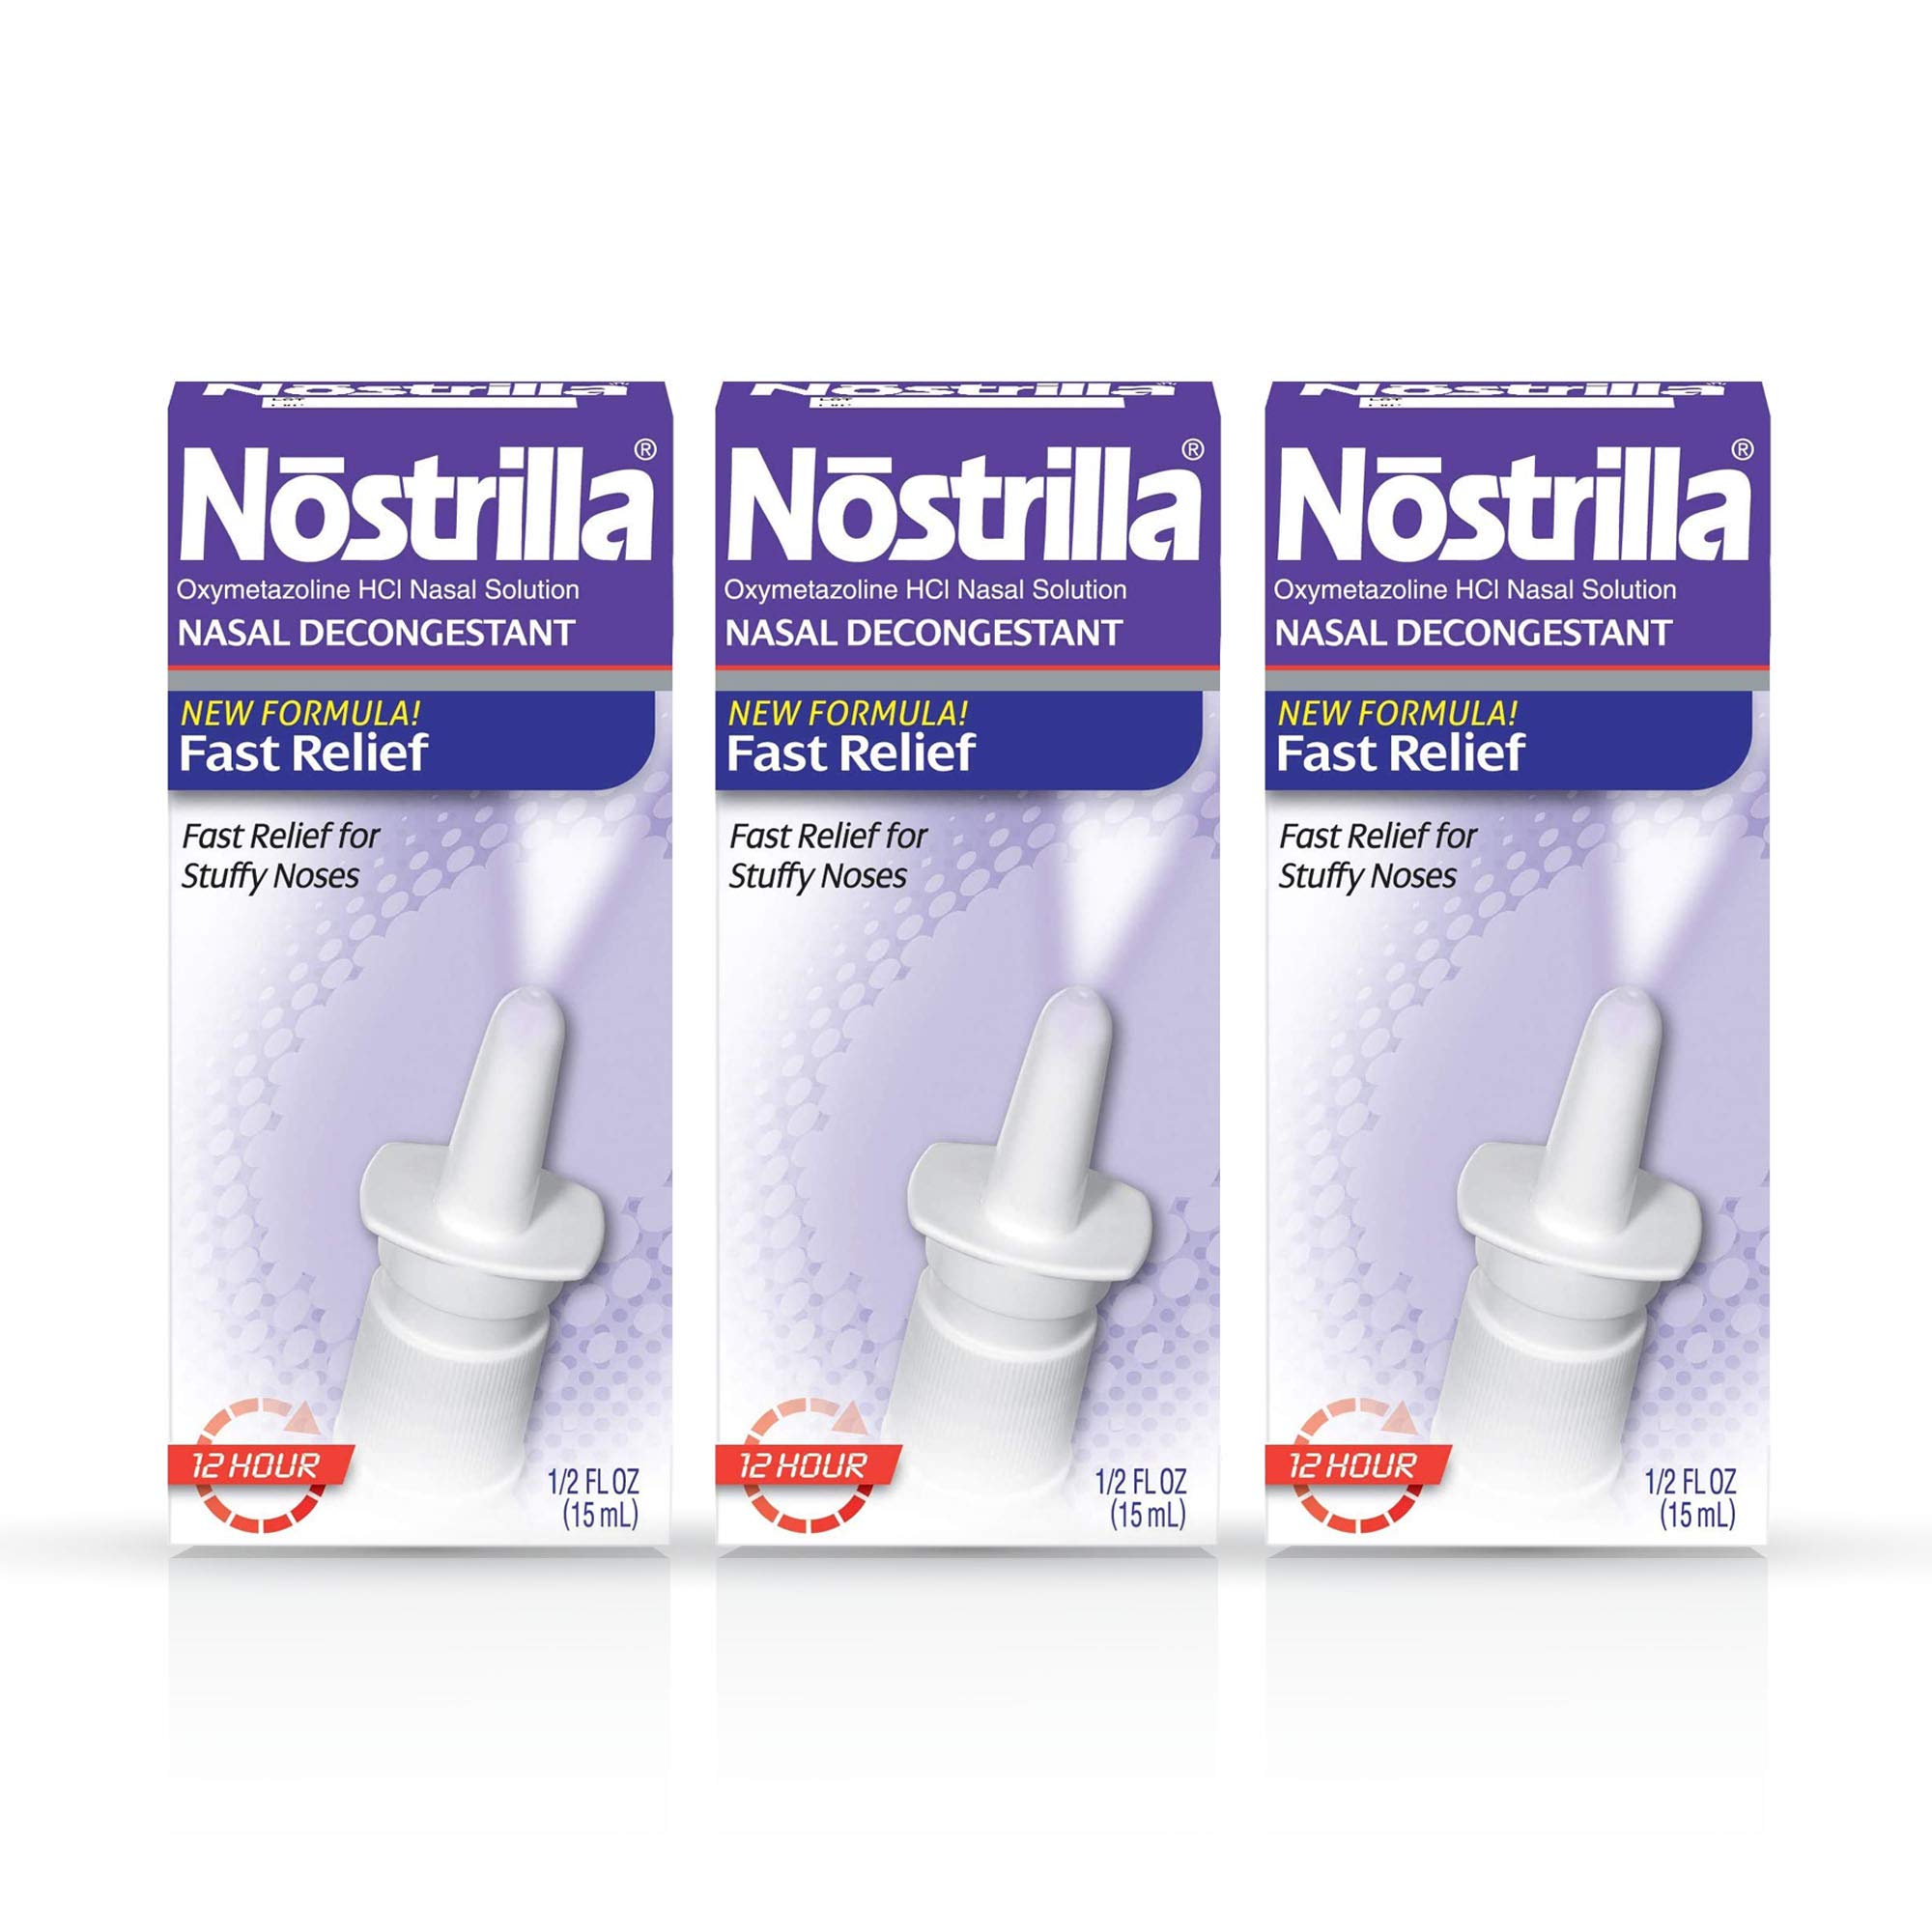 Nostrilla Nasal Decongestant | Effective Relief of Nasal Congestion | Up to 12 hours of Relief | 0.50 FL OZ Each | Pack of 3